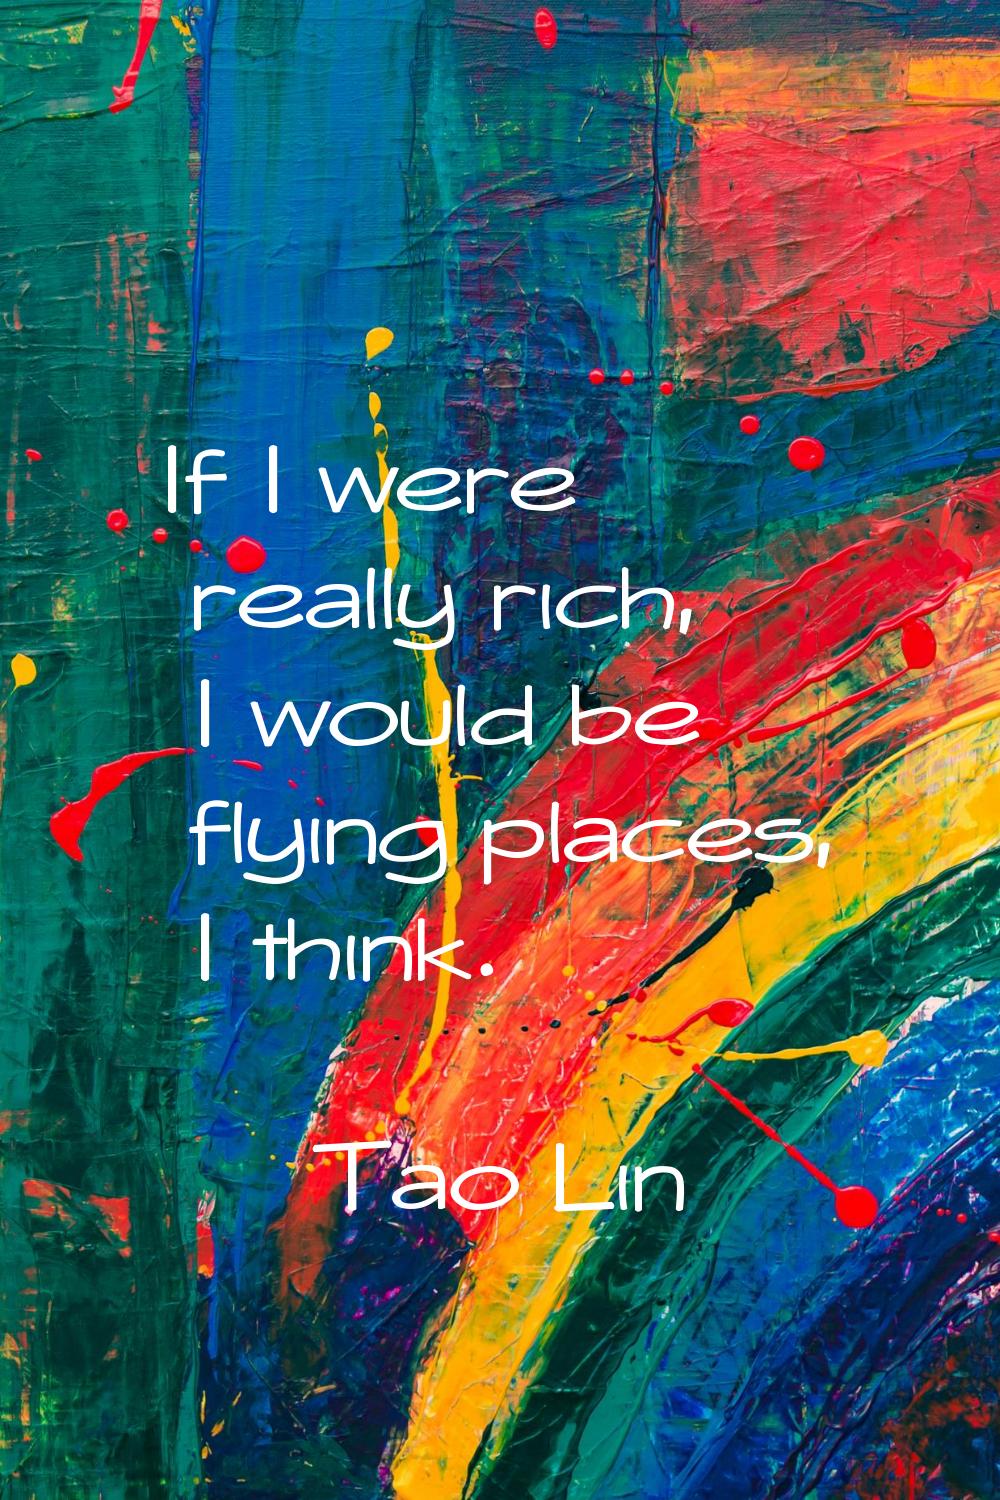 If I were really rich, I would be flying places, I think.